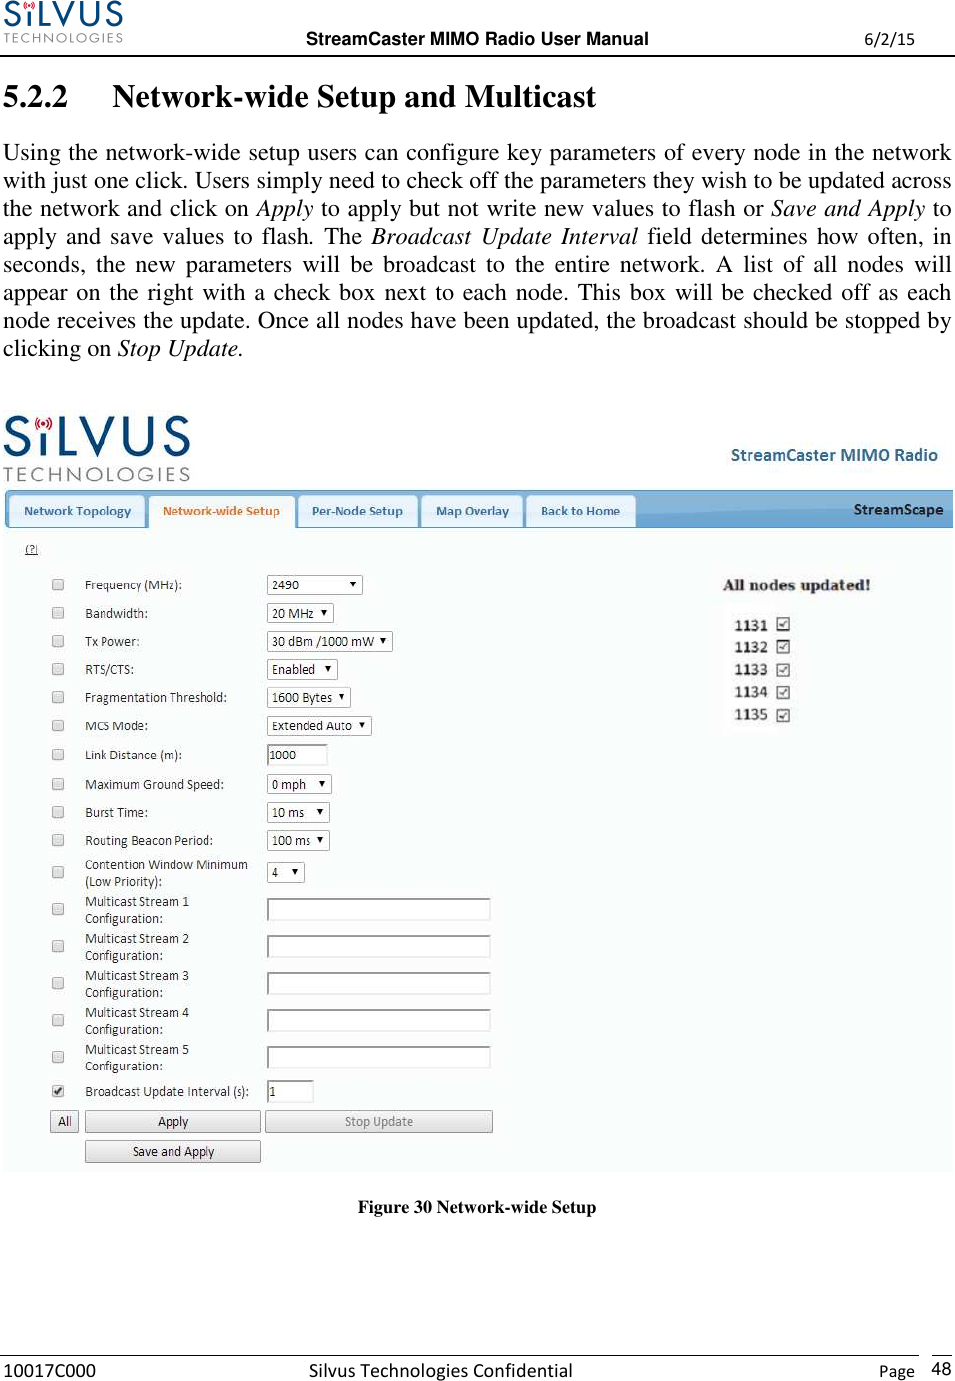  StreamCaster MIMO Radio User Manual  6/2/15 10017C000 Silvus Technologies Confidential    Page   48 5.2.2 Network-wide Setup and Multicast Using the network-wide setup users can configure key parameters of every node in the network with just one click. Users simply need to check off the parameters they wish to be updated across the network and click on Apply to apply but not write new values to flash or Save and Apply to apply and save values to flash. The Broadcast Update Interval field determines how often, in seconds,  the new  parameters  will  be  broadcast to  the  entire  network.  A  list  of  all  nodes  will appear on the right with a check box next to each node. This box will be checked off as each node receives the update. Once all nodes have been updated, the broadcast should be stopped by clicking on Stop Update.   Figure 30 Network-wide Setup   